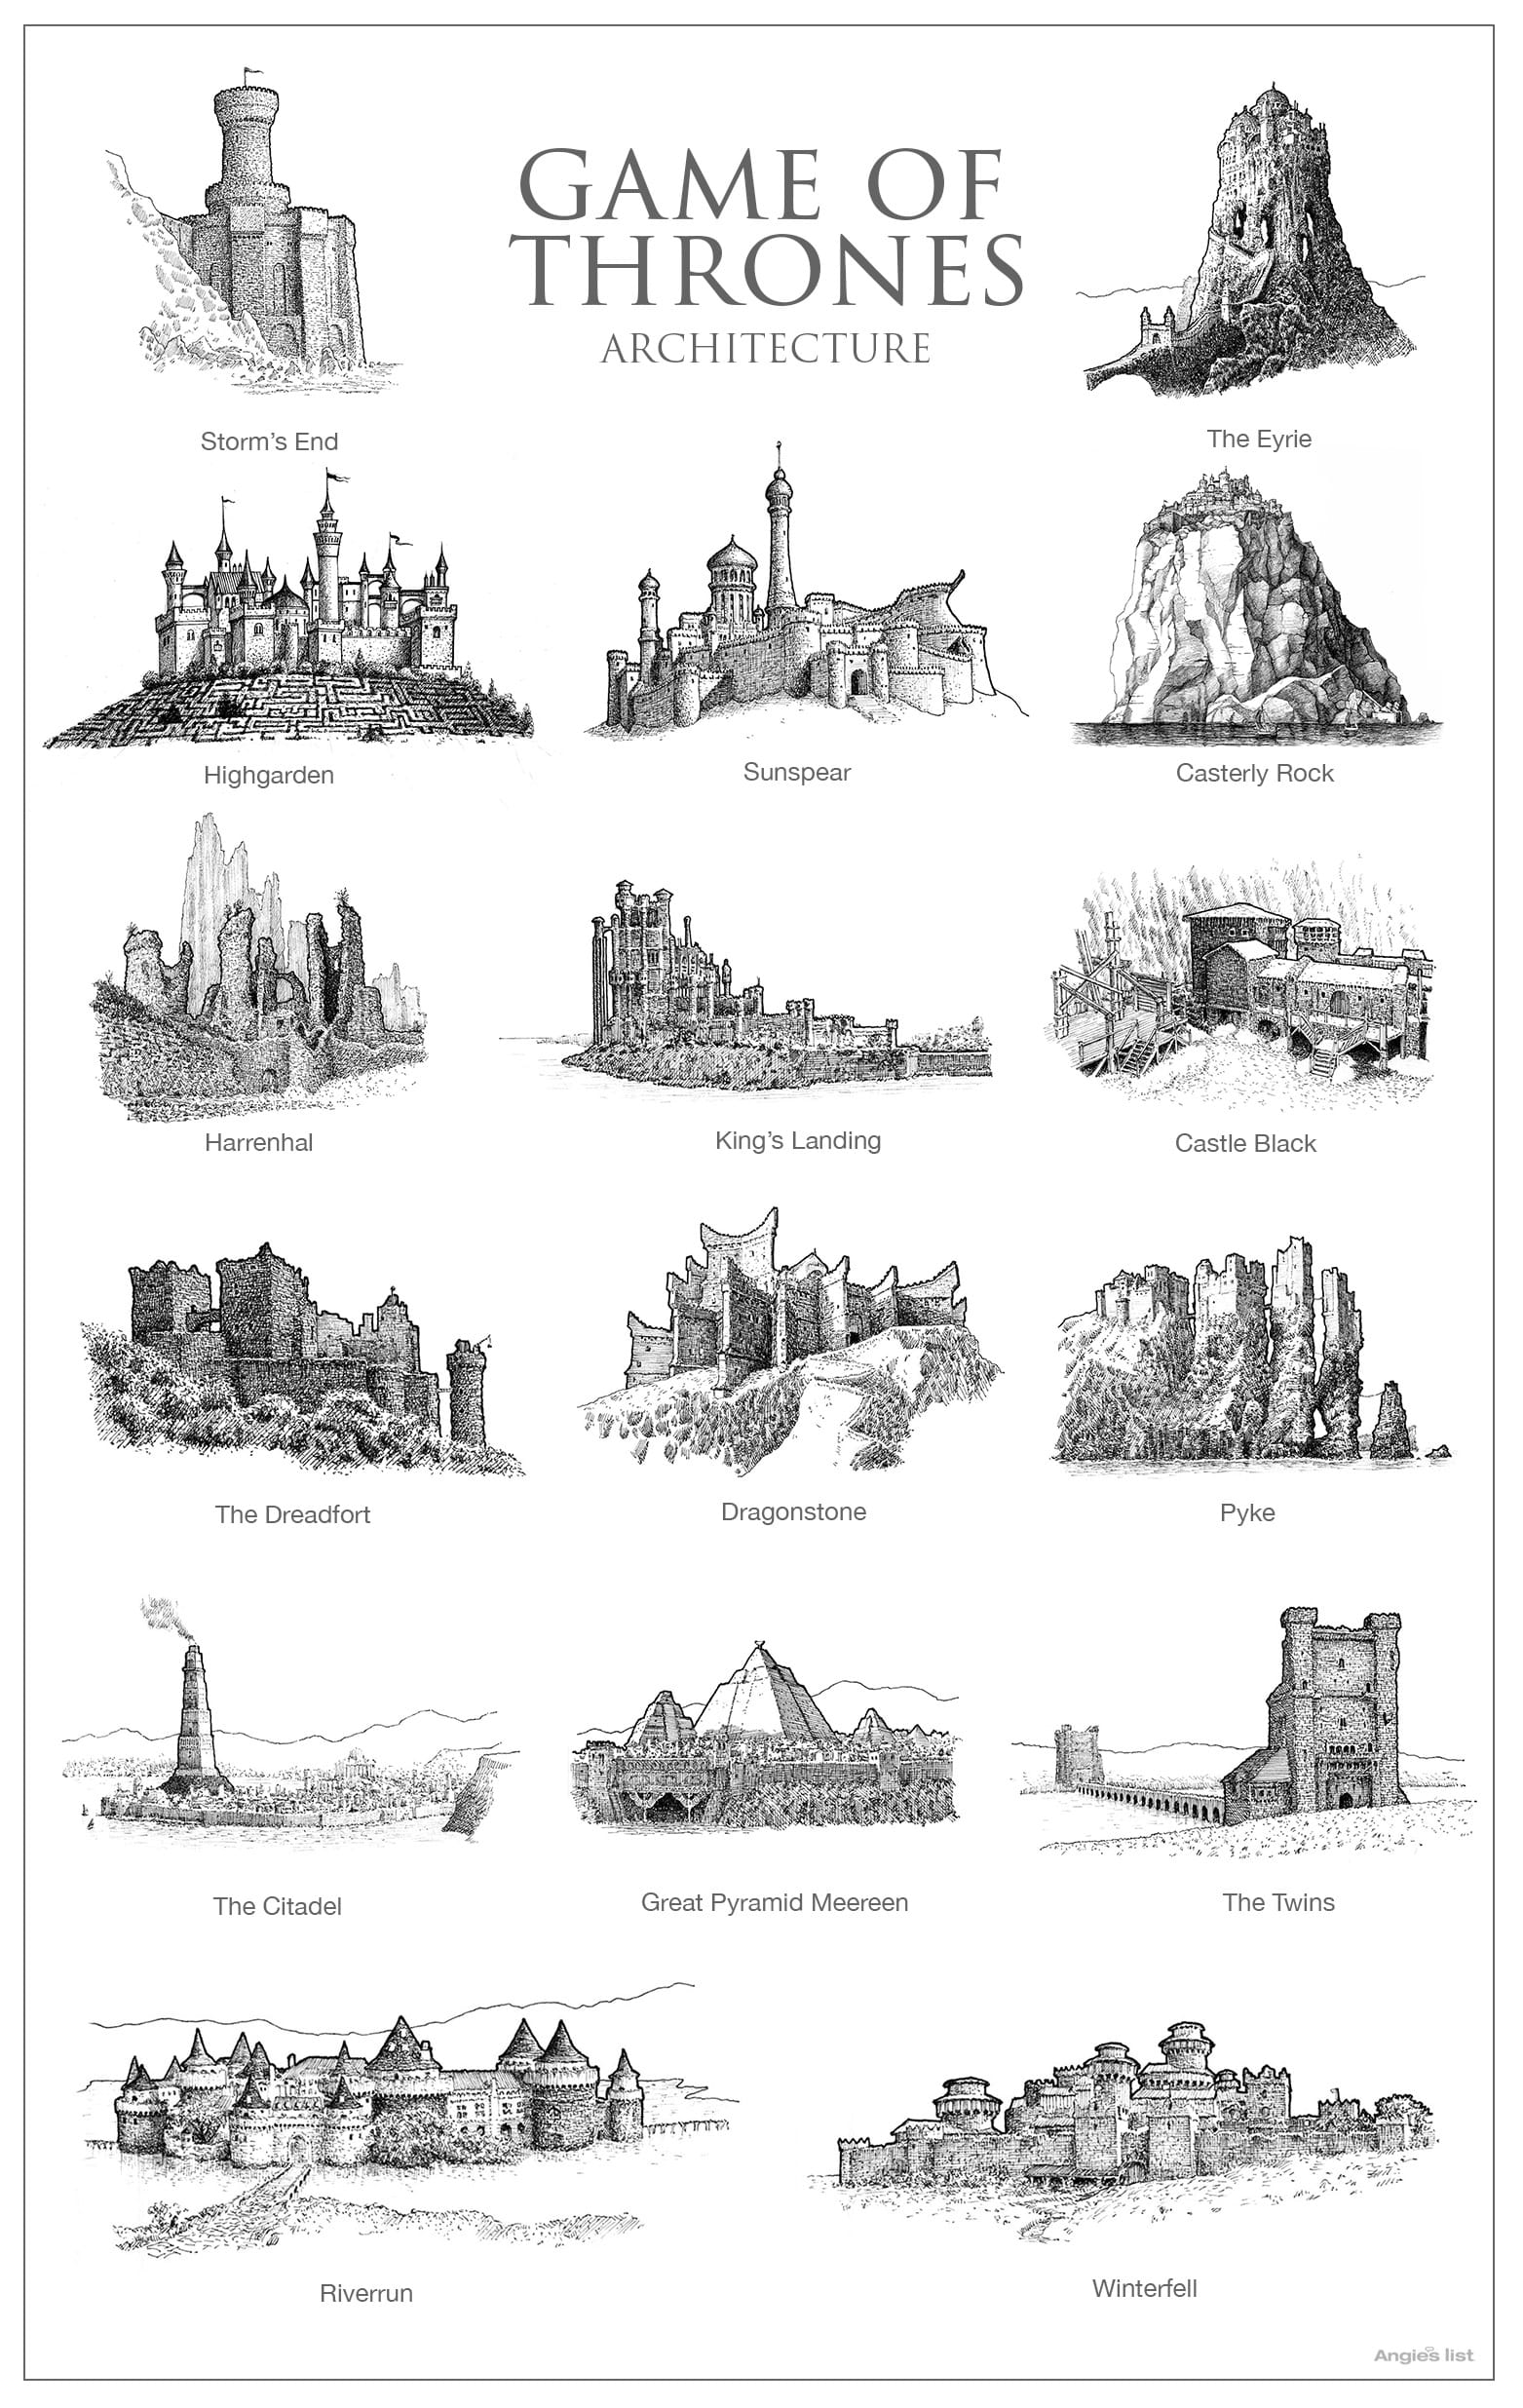 Hand-drawn architecture for Game of Thrones